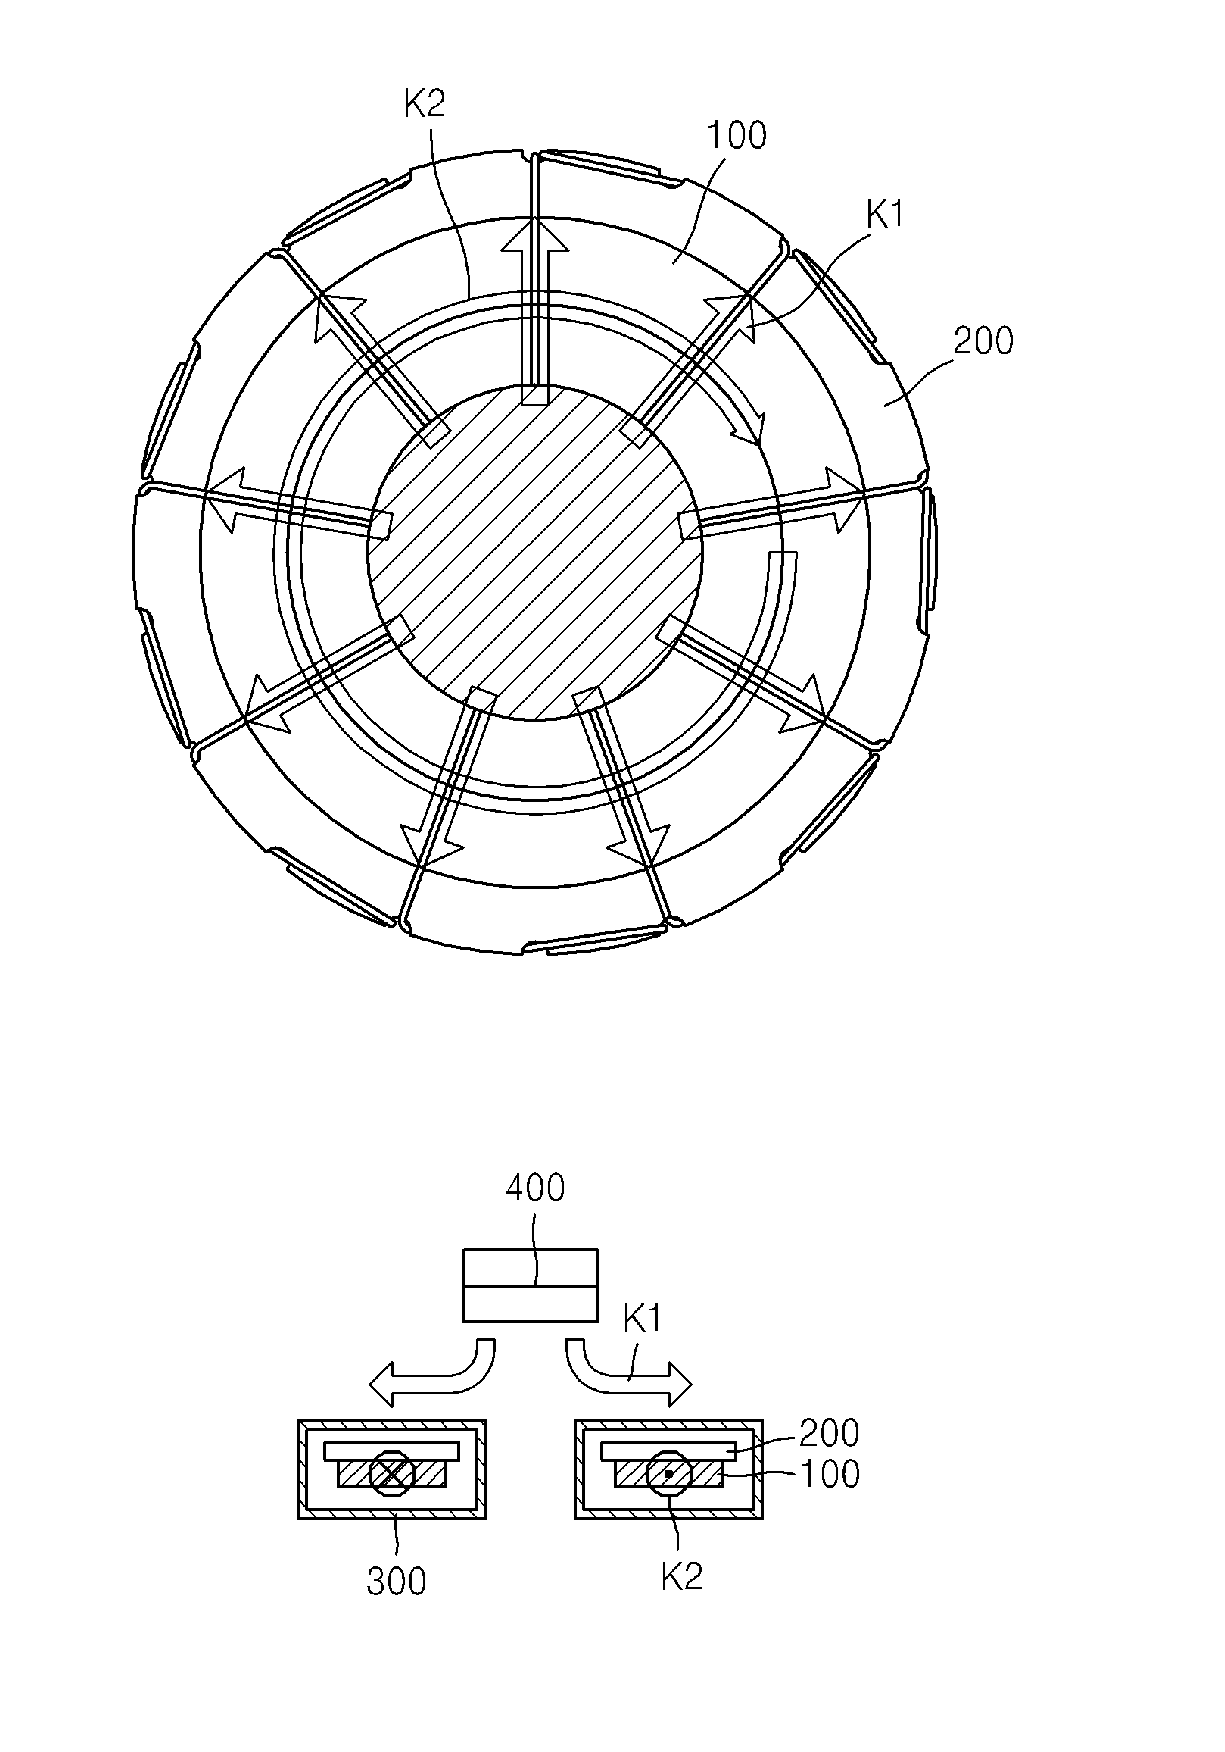 Omni-directional shear-horizontal wave magnetostrictive patch transducer and method of winding coil